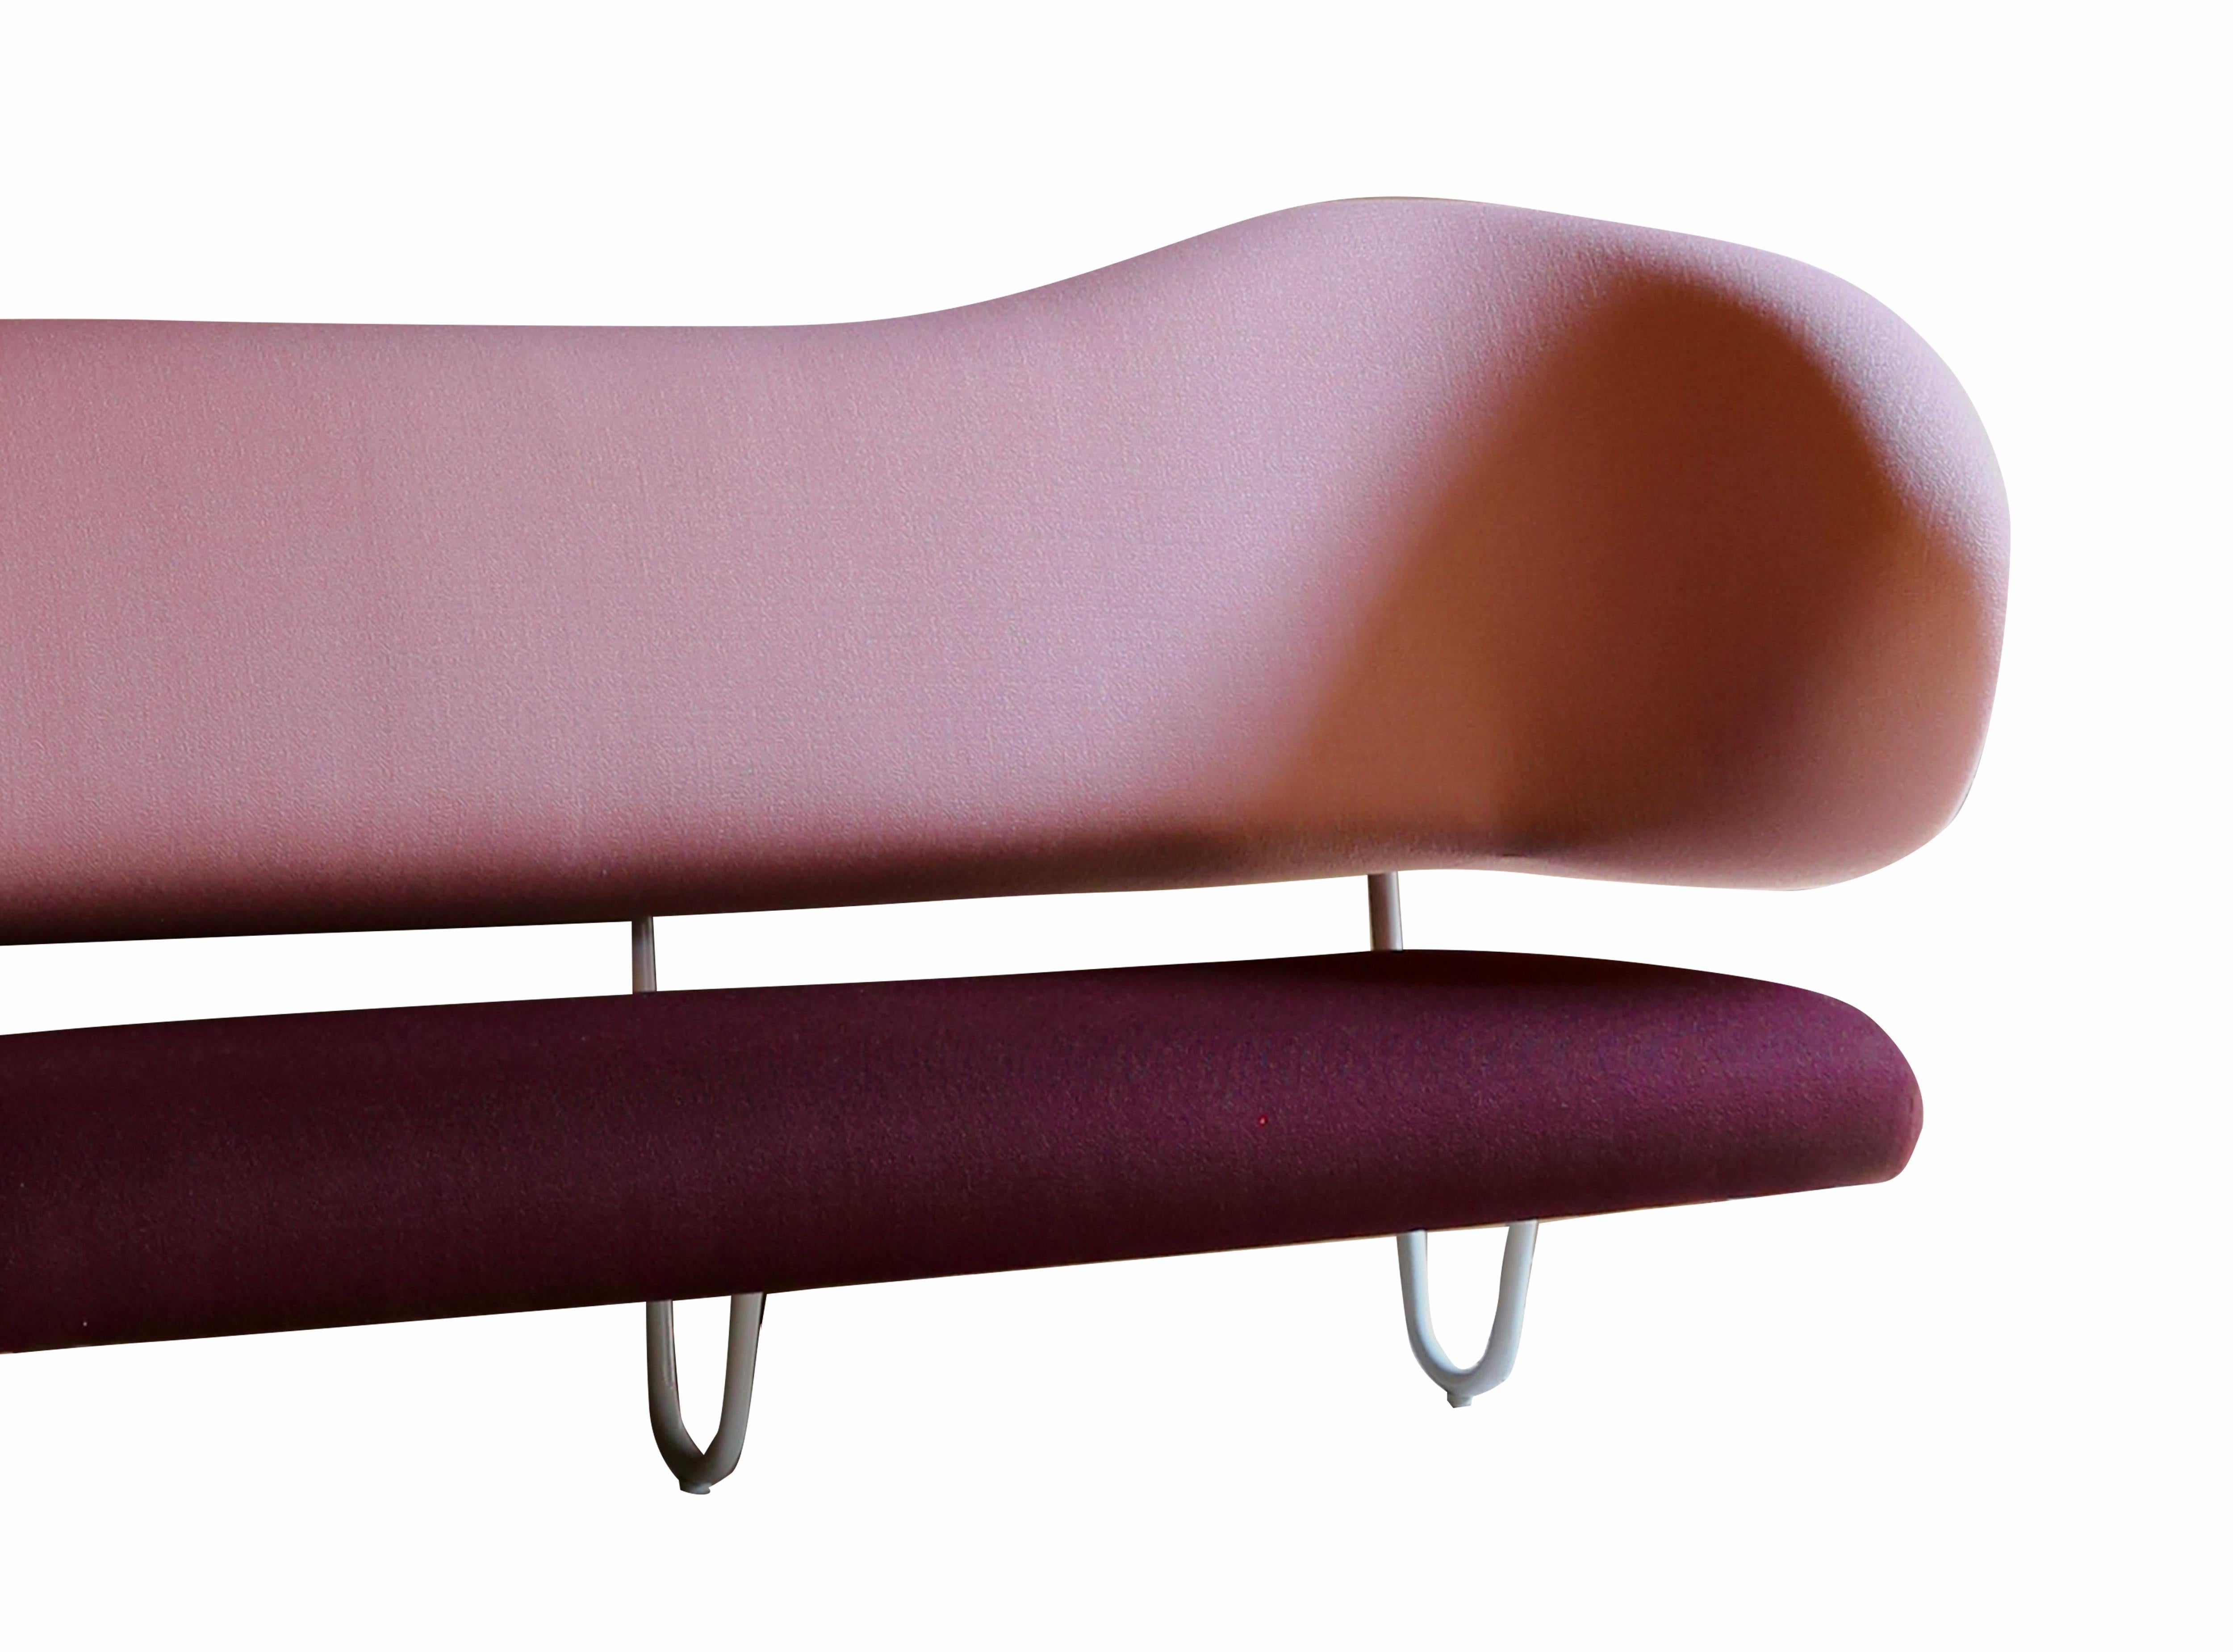 Sofa designed by Finn Juhl in 1950, relaunched in 2007.
Manufactured by House of Finn Juhl in Denmark.

Finn Juhl featured this sofa in several of his interior design projects such as Villa Aubertin in Denmark, which he designed in 1952, and in